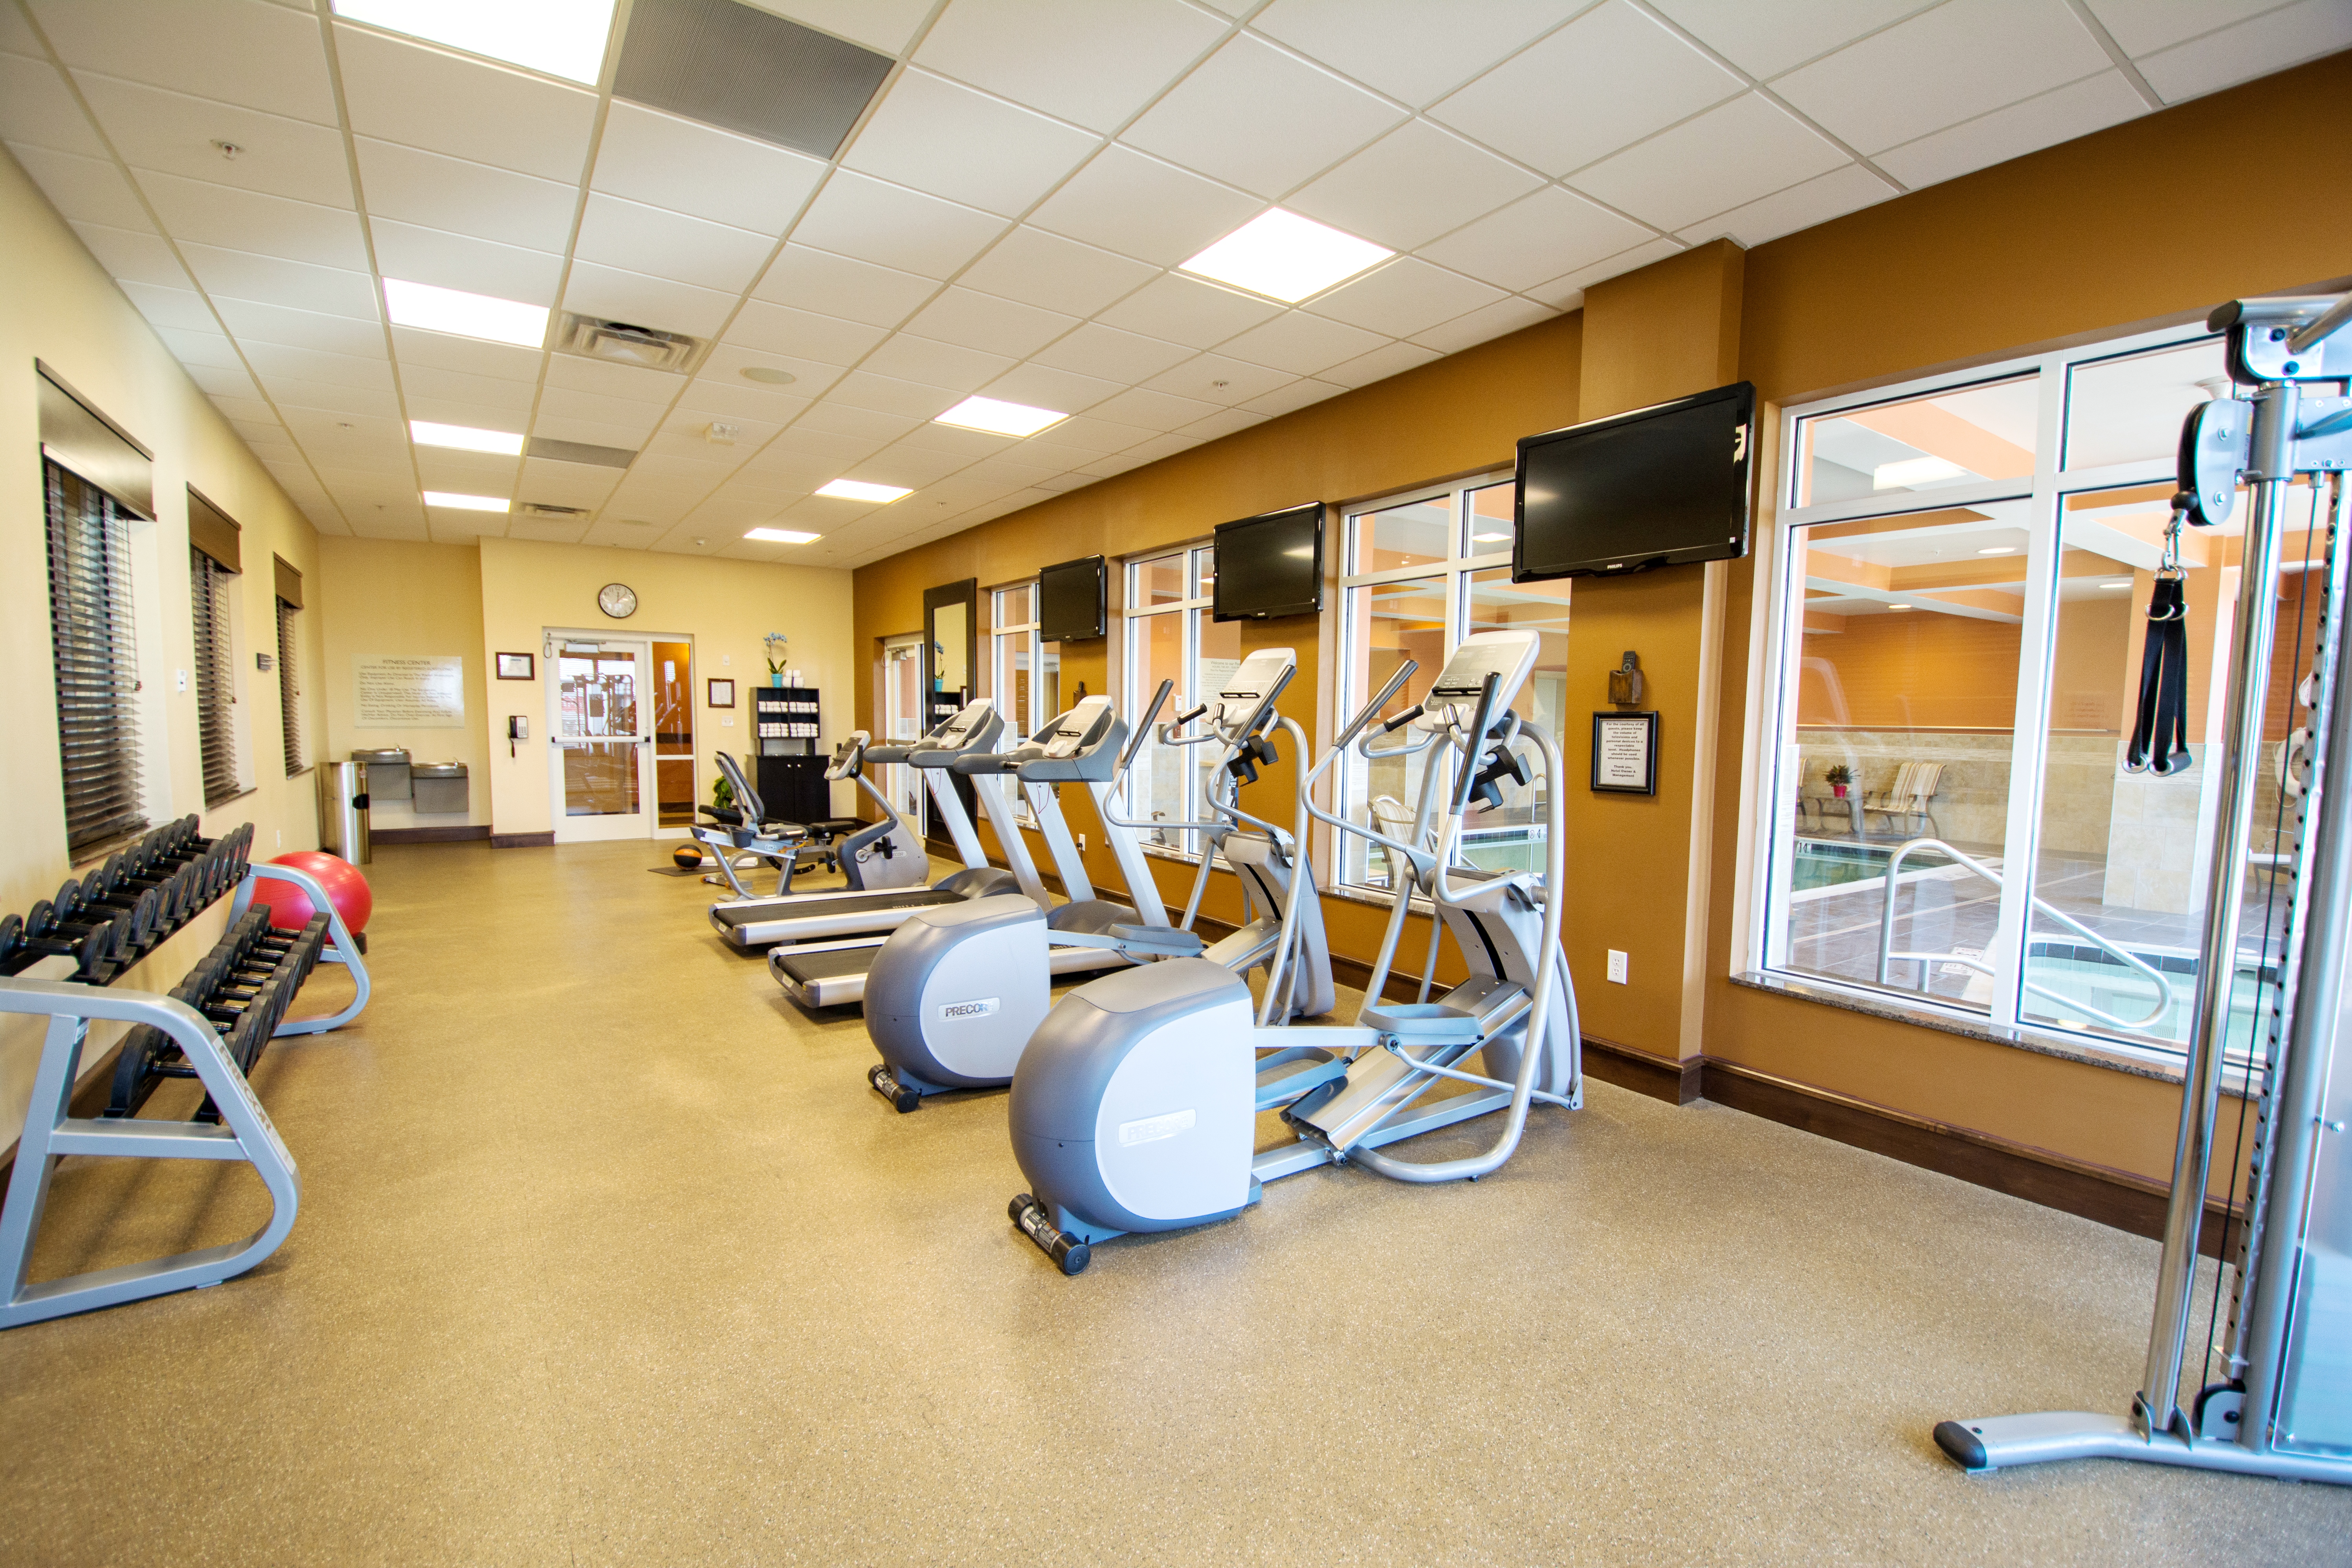 Fitness Center with ellipticals, weights, and other equipment.